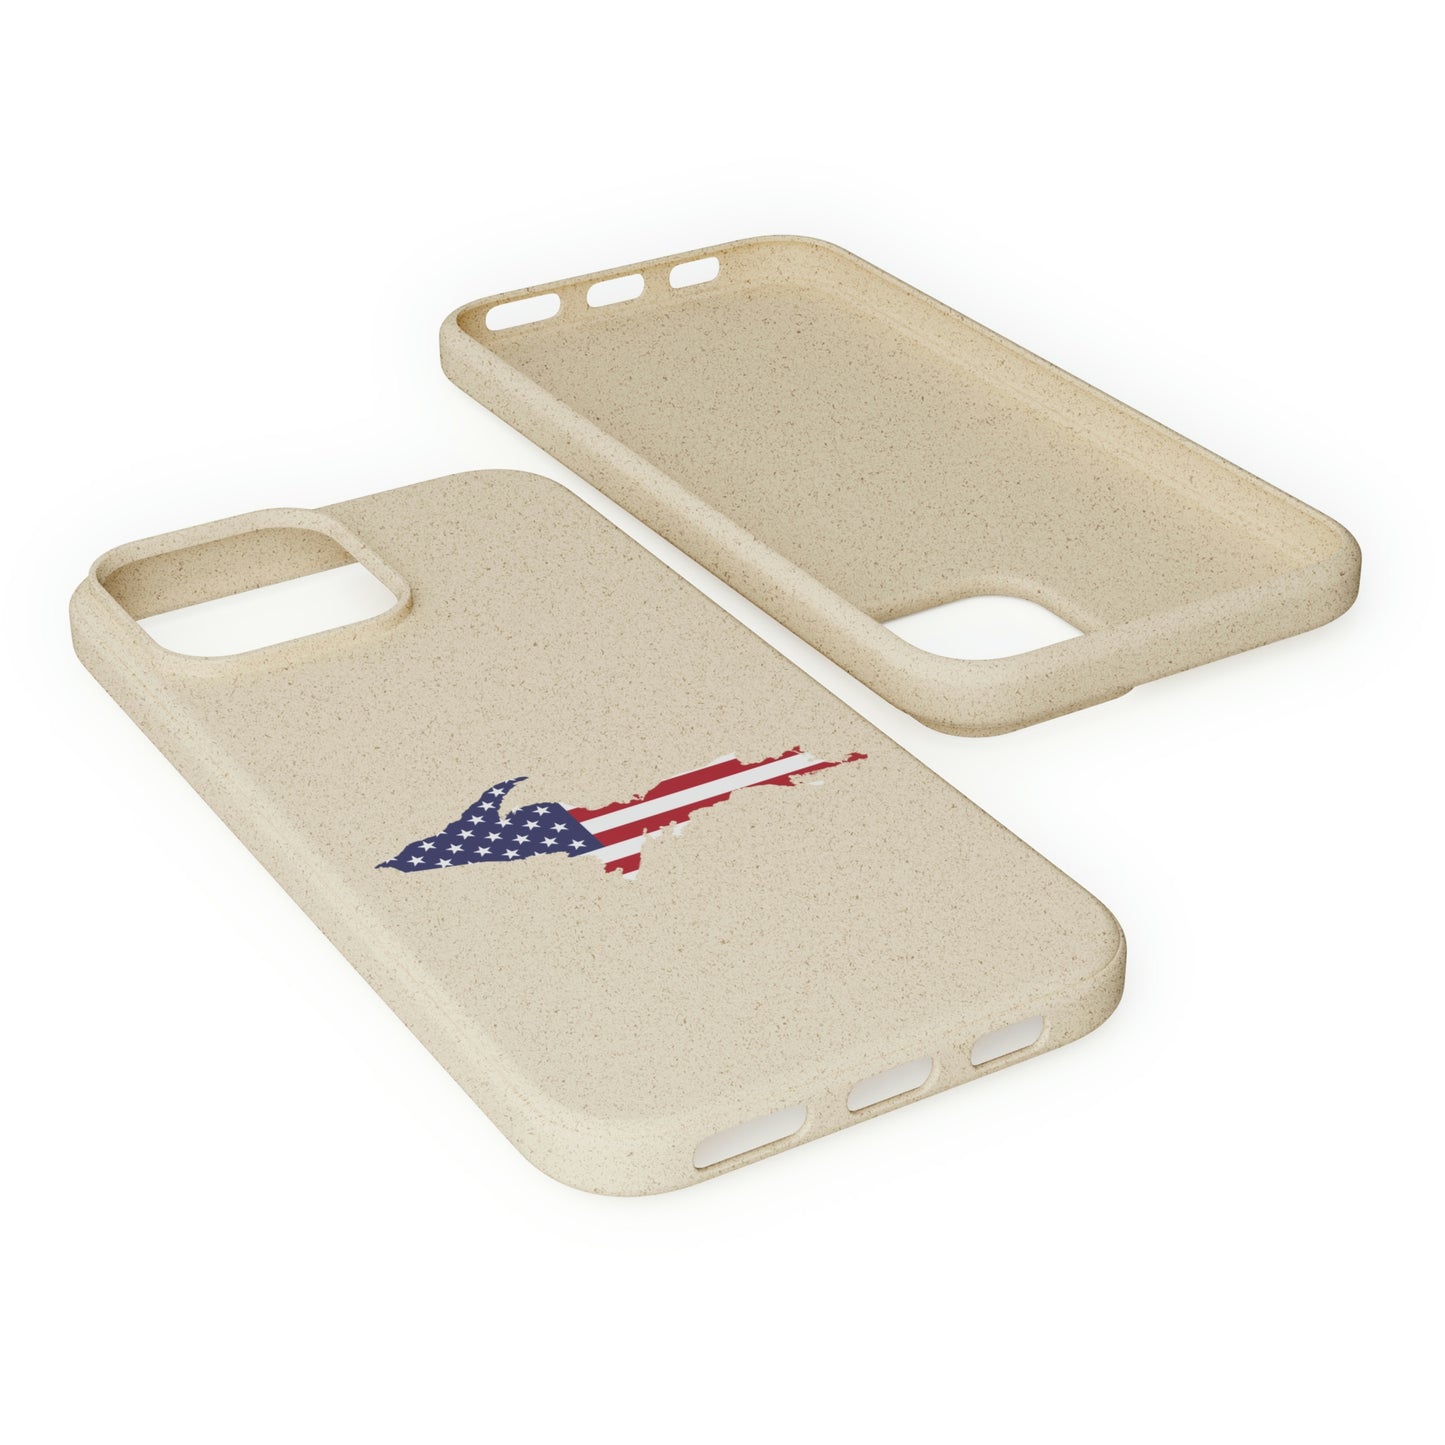 Michigan Upper Peninsula Biodegradable Phone Cases (w/ UP USA Flag Outline) | Apple iPhone